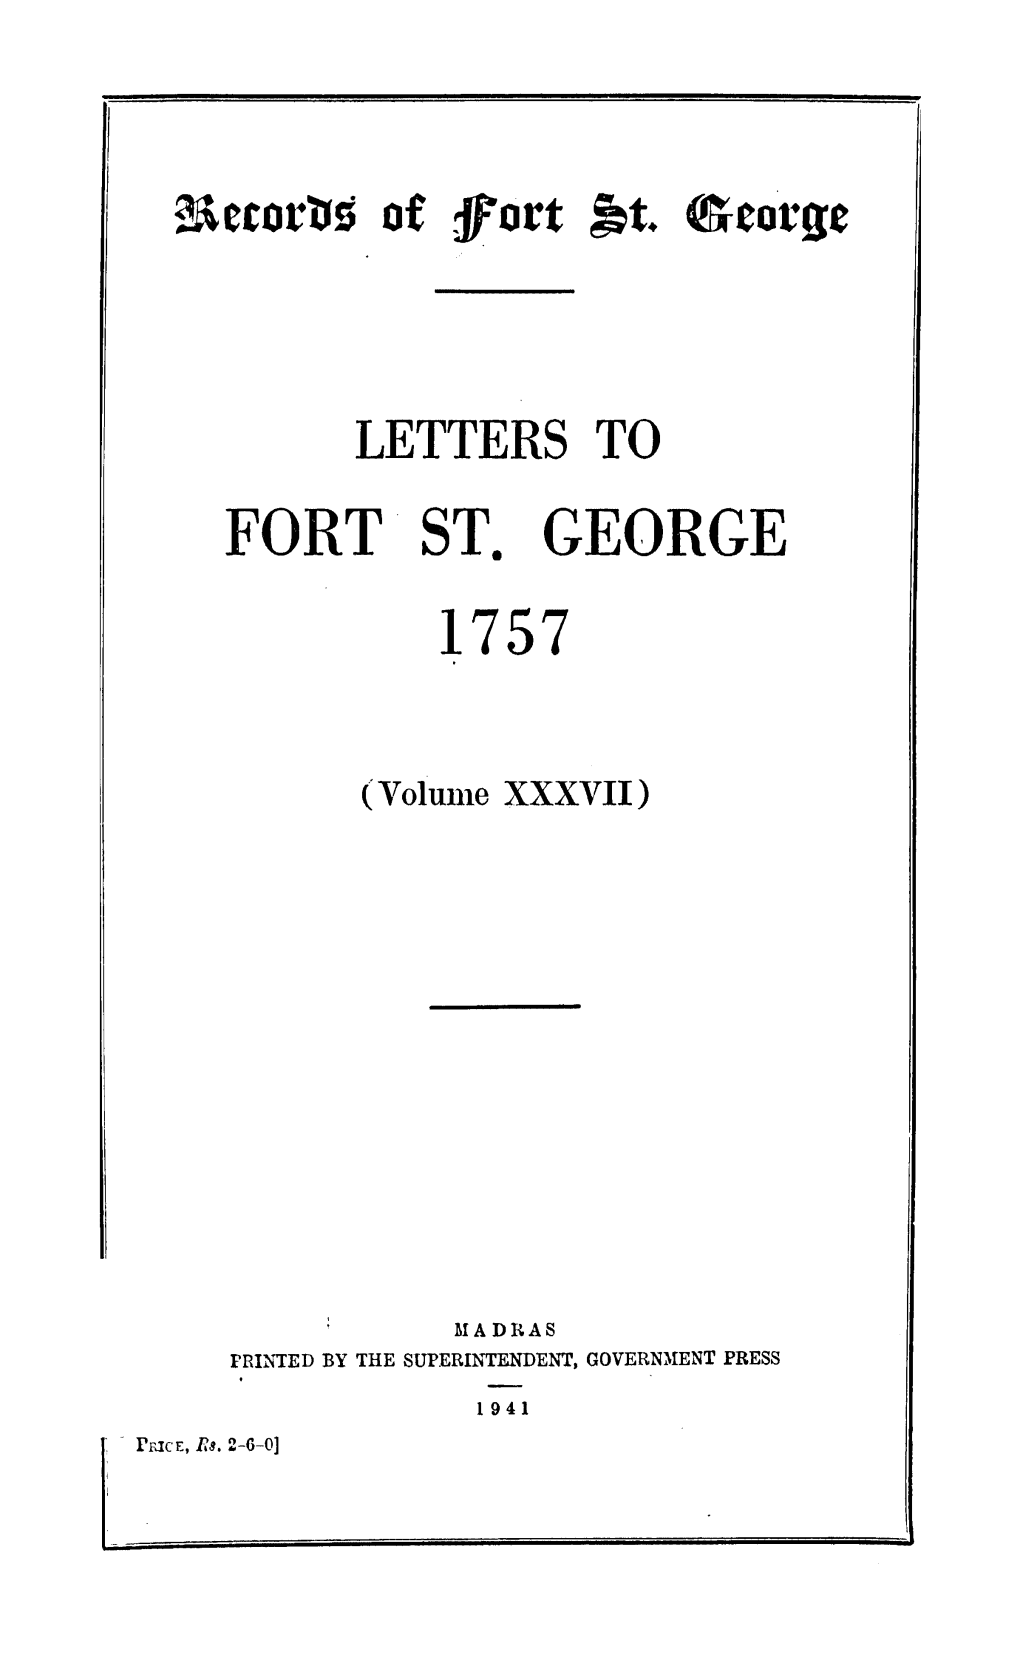 Fort . St. George 1757